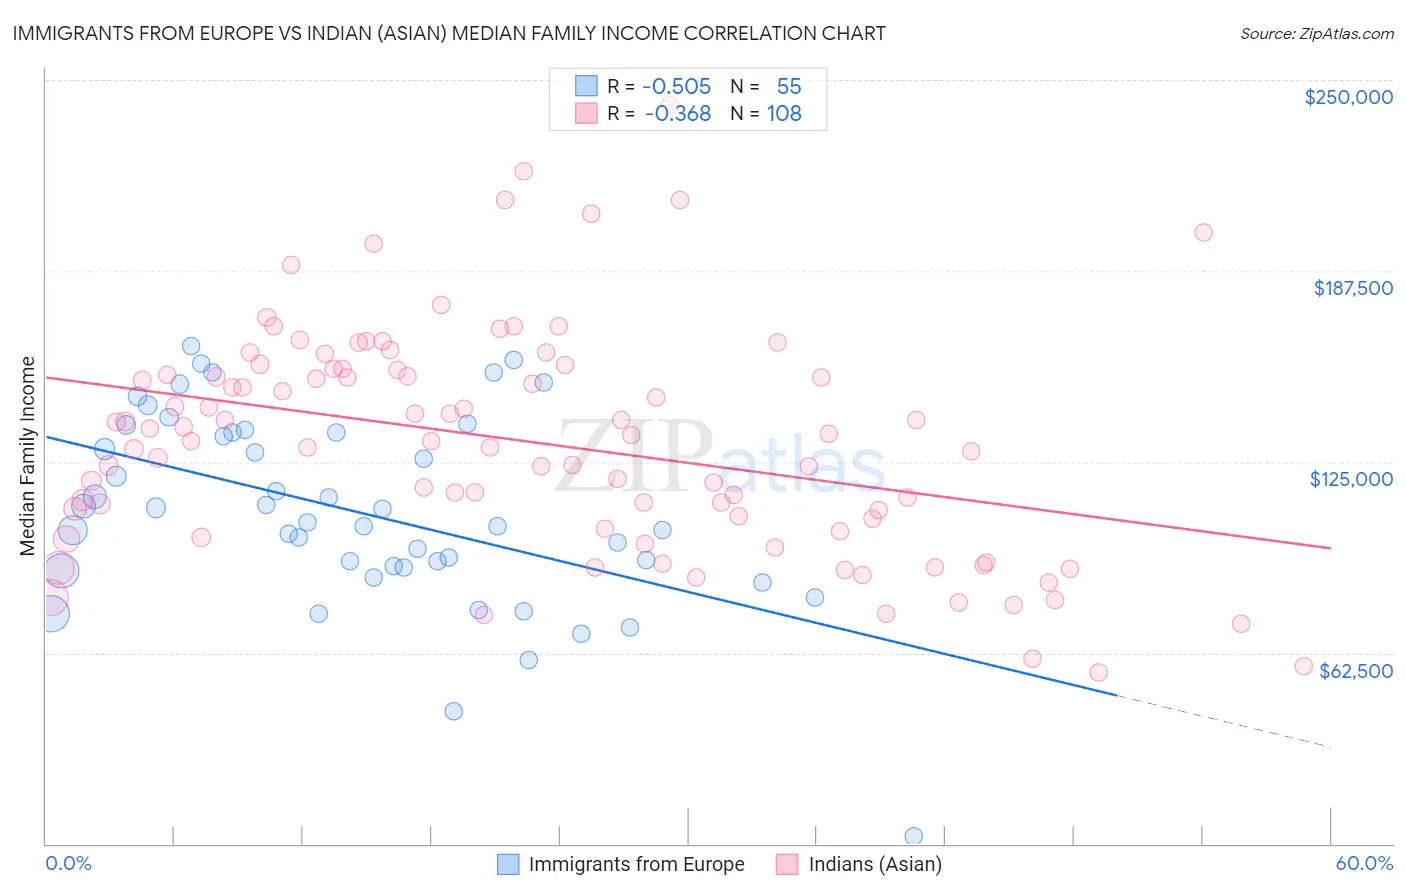 Immigrants from Europe vs Indian (Asian) Median Family Income